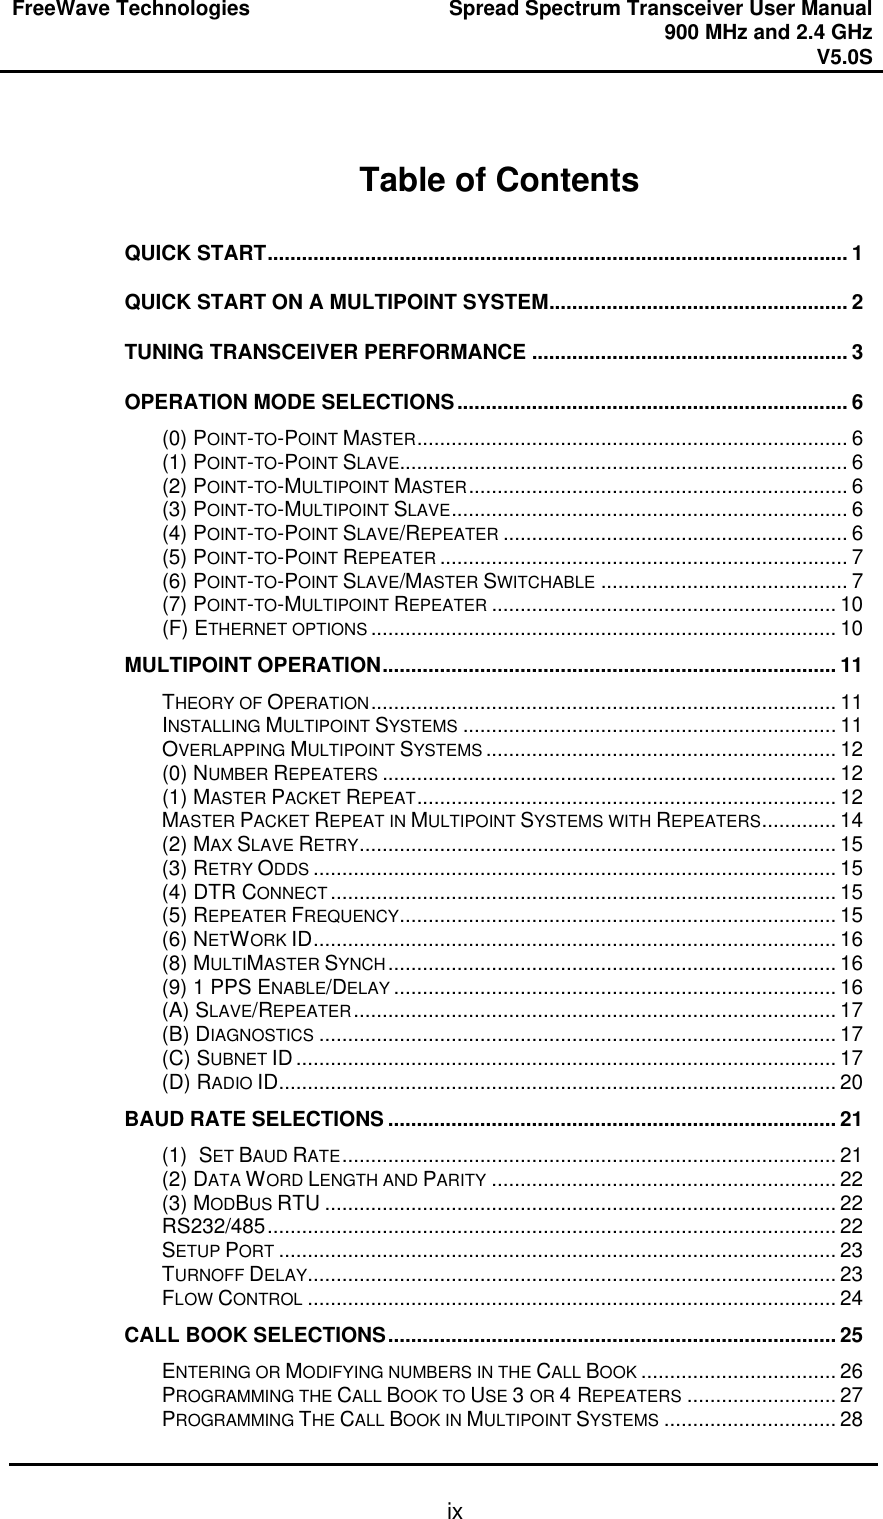 FreeWave Technologies Spread Spectrum Transceiver User Manual 900 MHz and 2.4 GHz V5.0S   ix  Table of Contents  QUICK START..................................................................................................... 1 QUICK START ON A MULTIPOINT SYSTEM.................................................... 2 TUNING TRANSCEIVER PERFORMANCE ....................................................... 3 OPERATION MODE SELECTIONS.................................................................... 6 (0) POINT-TO-POINT MASTER........................................................................... 6 (1) POINT-TO-POINT SLAVE.............................................................................. 6 (2) POINT-TO-MULTIPOINT MASTER.................................................................. 6 (3) POINT-TO-MULTIPOINT SLAVE..................................................................... 6 (4) POINT-TO-POINT SLAVE/REPEATER ............................................................ 6 (5) POINT-TO-POINT REPEATER ....................................................................... 7 (6) POINT-TO-POINT SLAVE/MASTER SWITCHABLE ........................................... 7 (7) POINT-TO-MULTIPOINT REPEATER ............................................................ 10 (F) ETHERNET OPTIONS ................................................................................. 10 MULTIPOINT OPERATION............................................................................... 11 THEORY OF OPERATION................................................................................. 11 INSTALLING MULTIPOINT SYSTEMS ................................................................. 11 OVERLAPPING MULTIPOINT SYSTEMS ............................................................. 12 (0) NUMBER REPEATERS ............................................................................... 12 (1) MASTER PACKET REPEAT......................................................................... 12 MASTER PACKET REPEAT IN MULTIPOINT SYSTEMS WITH REPEATERS............. 14 (2) MAX SLAVE RETRY................................................................................... 15 (3) RETRY ODDS ........................................................................................... 15 (4) DTR CONNECT ........................................................................................ 15 (5) REPEATER FREQUENCY............................................................................ 15 (6) NETWORK ID........................................................................................... 16 (8) MULTIMASTER SYNCH.............................................................................. 16 (9) 1 PPS ENABLE/DELAY ............................................................................. 16 (A) SLAVE/REPEATER.................................................................................... 17 (B) DIAGNOSTICS .......................................................................................... 17 (C) SUBNET ID .............................................................................................. 17 (D) RADIO ID................................................................................................. 20 BAUD RATE SELECTIONS .............................................................................. 21 (1)  SET BAUD RATE...................................................................................... 21 (2) DATA WORD LENGTH AND PARITY ............................................................ 22 (3) MODBUS RTU ......................................................................................... 22 RS232/485................................................................................................... 22 SETUP PORT ................................................................................................. 23 TURNOFF DELAY............................................................................................ 23 FLOW CONTROL ............................................................................................ 24 CALL BOOK SELECTIONS.............................................................................. 25 ENTERING OR MODIFYING NUMBERS IN THE CALL BOOK .................................. 26 PROGRAMMING THE CALL BOOK TO USE 3 OR 4 REPEATERS .......................... 27 PROGRAMMING THE CALL BOOK IN MULTIPOINT SYSTEMS .............................. 28 